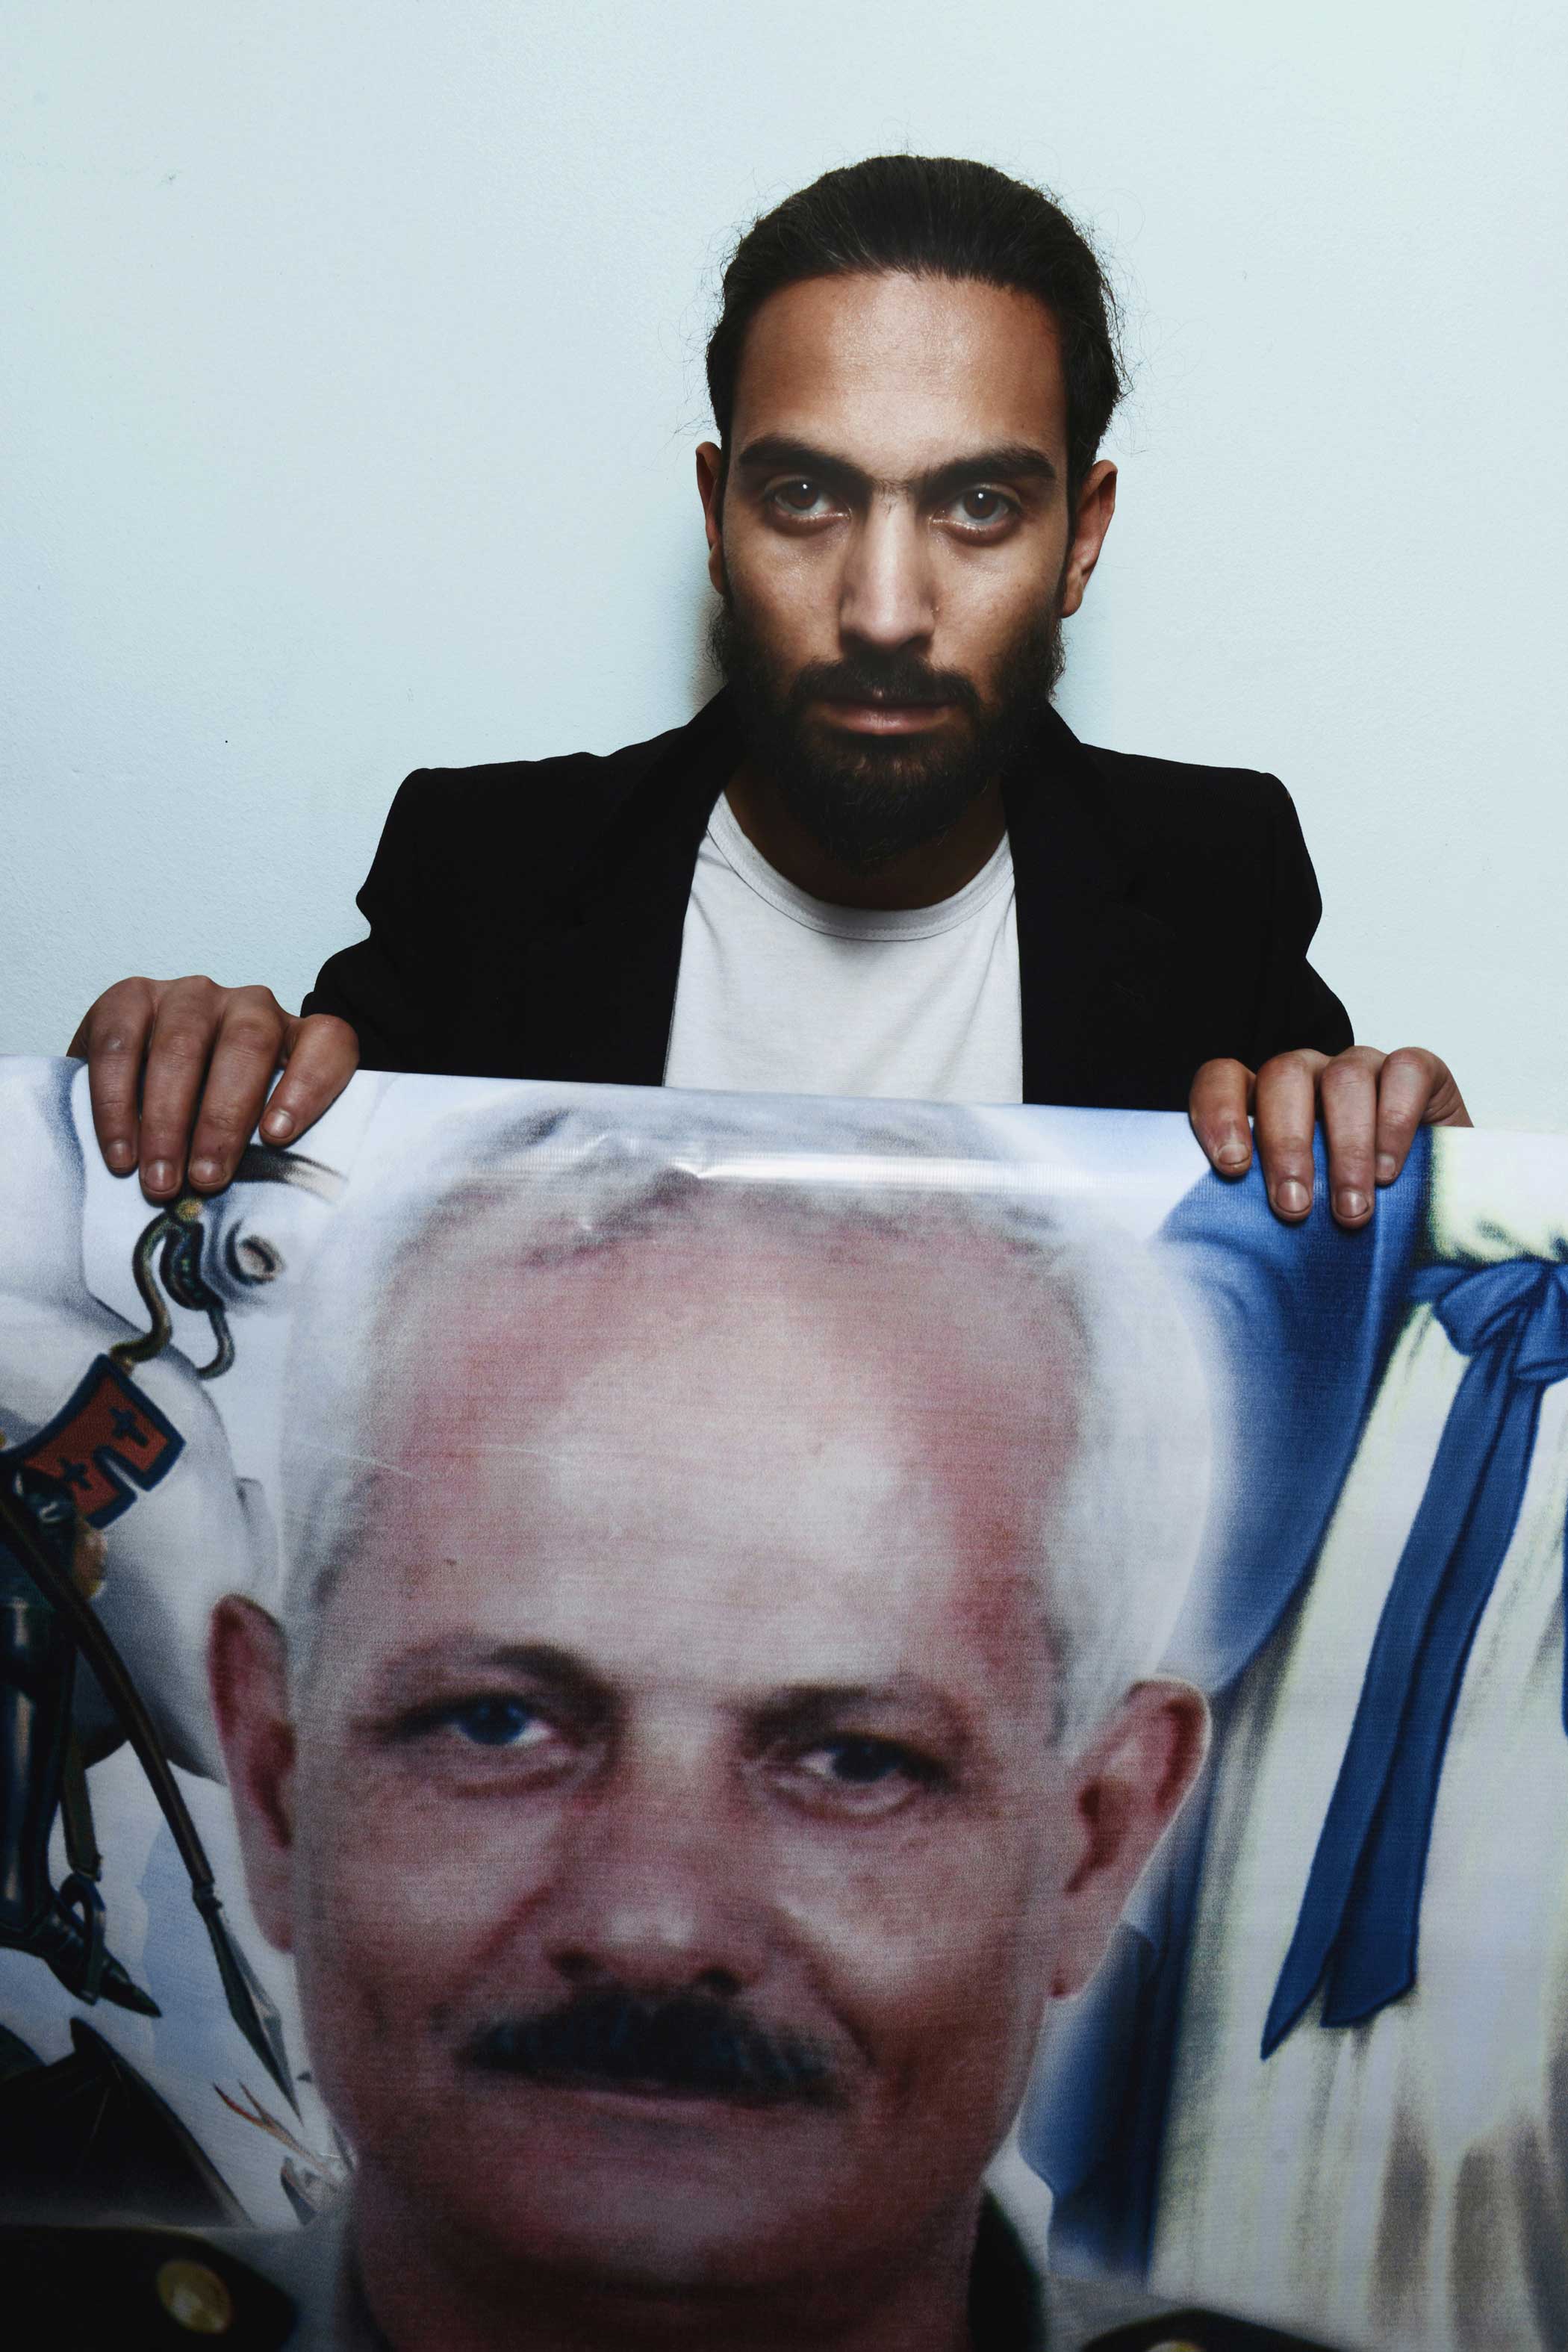 Emad Tadros, 27, holds a photo of his slain father, Medhat Tadros, 63. "My rather was a military officer and a man of God. He was known for being the man of duty," Emad said. "I was so sad when I first head the news, then I was relieved knowing he died in the church. He is a martyr," he added. "He always sat on the front bench in all services at the church. Next year on Palm Sunday, I will sit on the same bench hoping I would die like him."